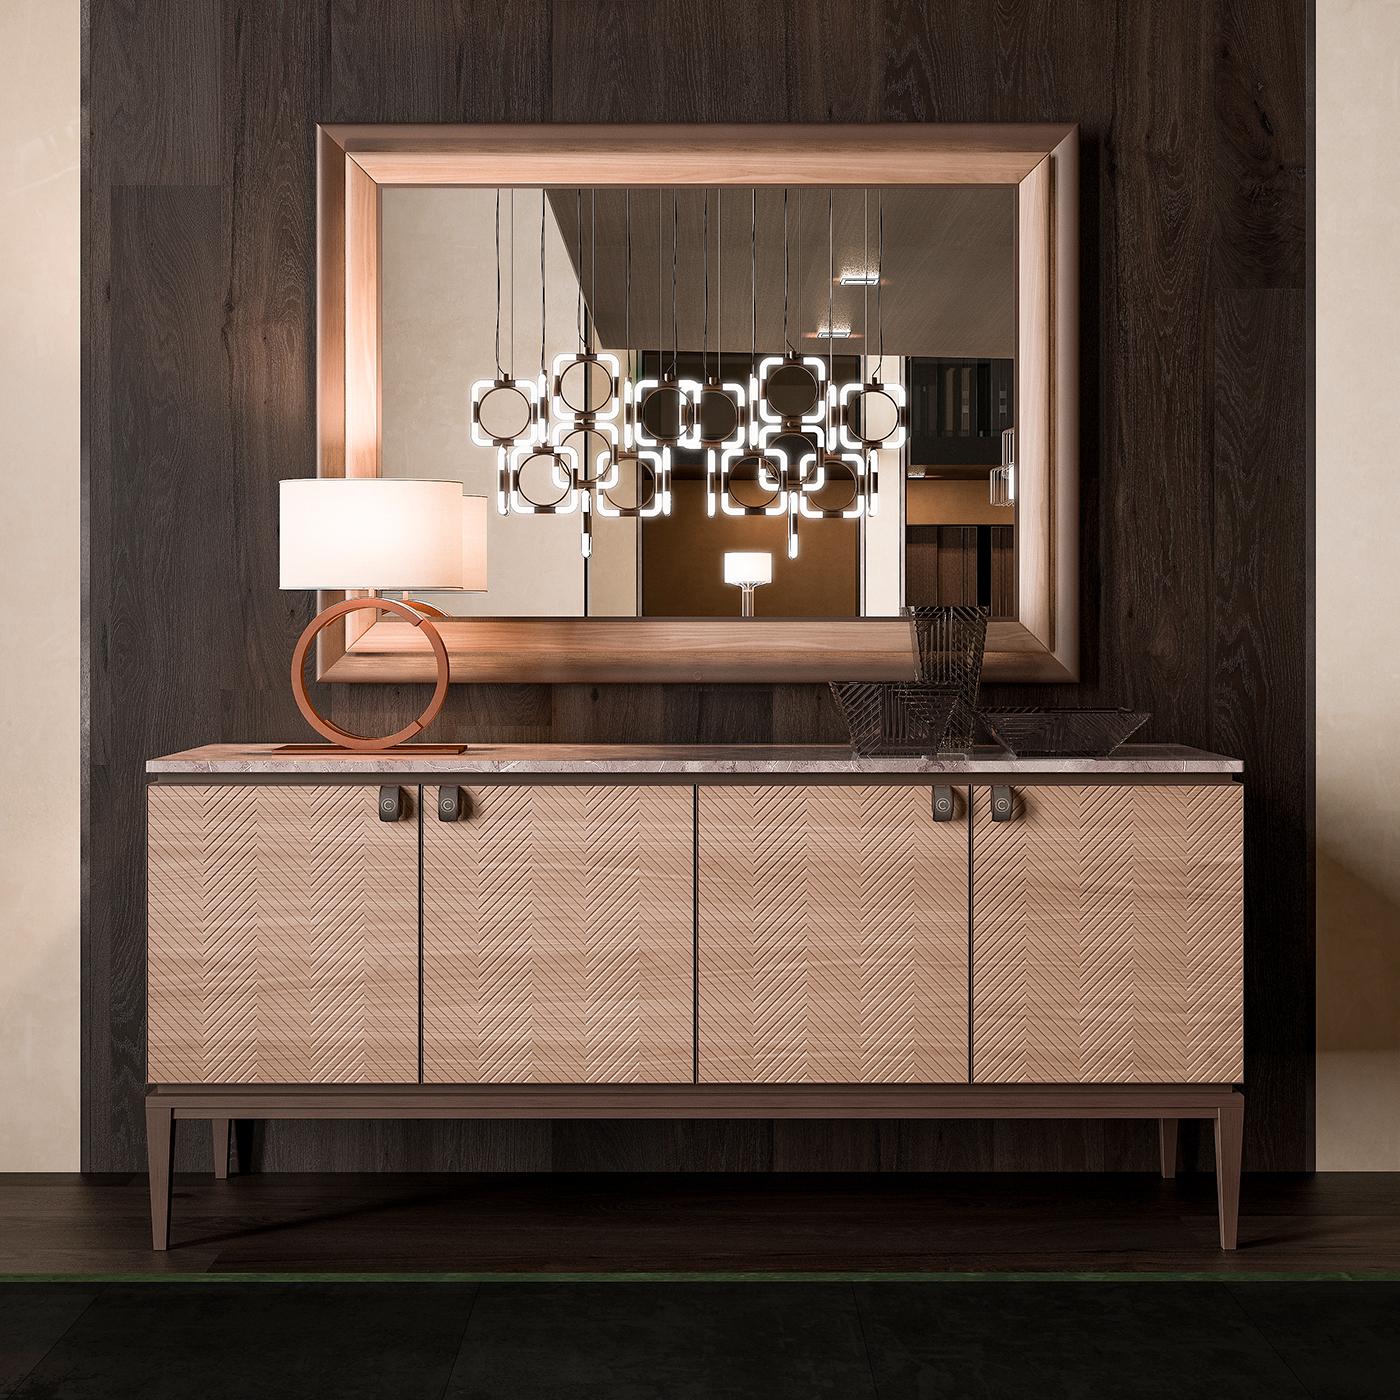 From a boutique collection of living and dining room furnishings, the marble sideboard with engraved veneer is characterized by its engraved zig-zag cabinet fronts. Topped in chic marble, the sideboard manages a minimalist feel thanks to its